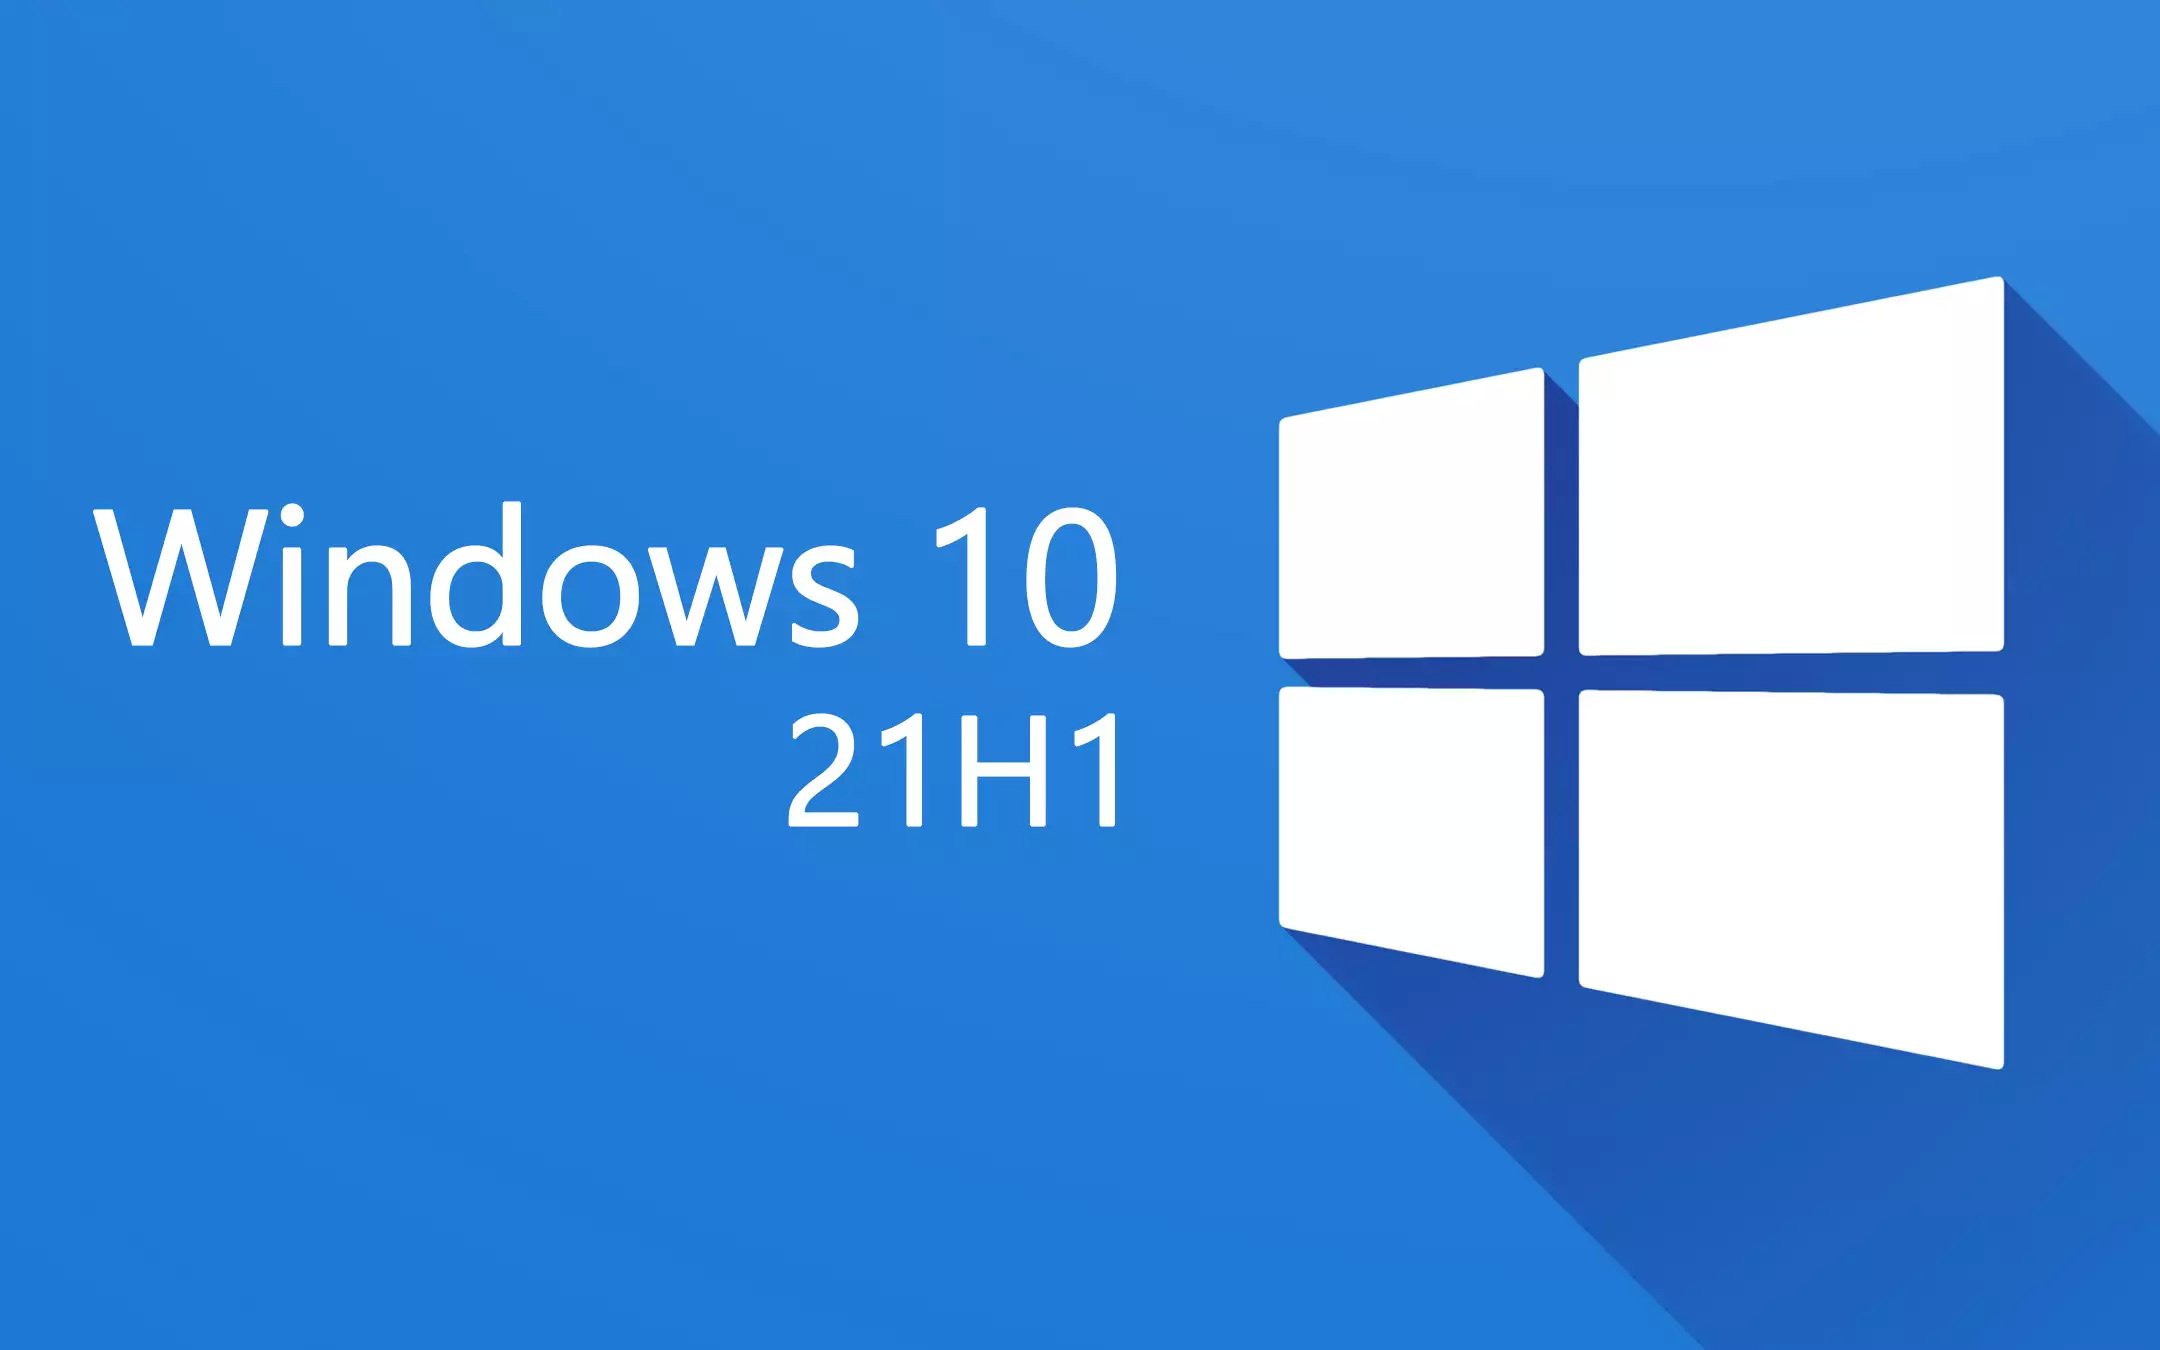 windows 10 21h1 iso download 64 bit french